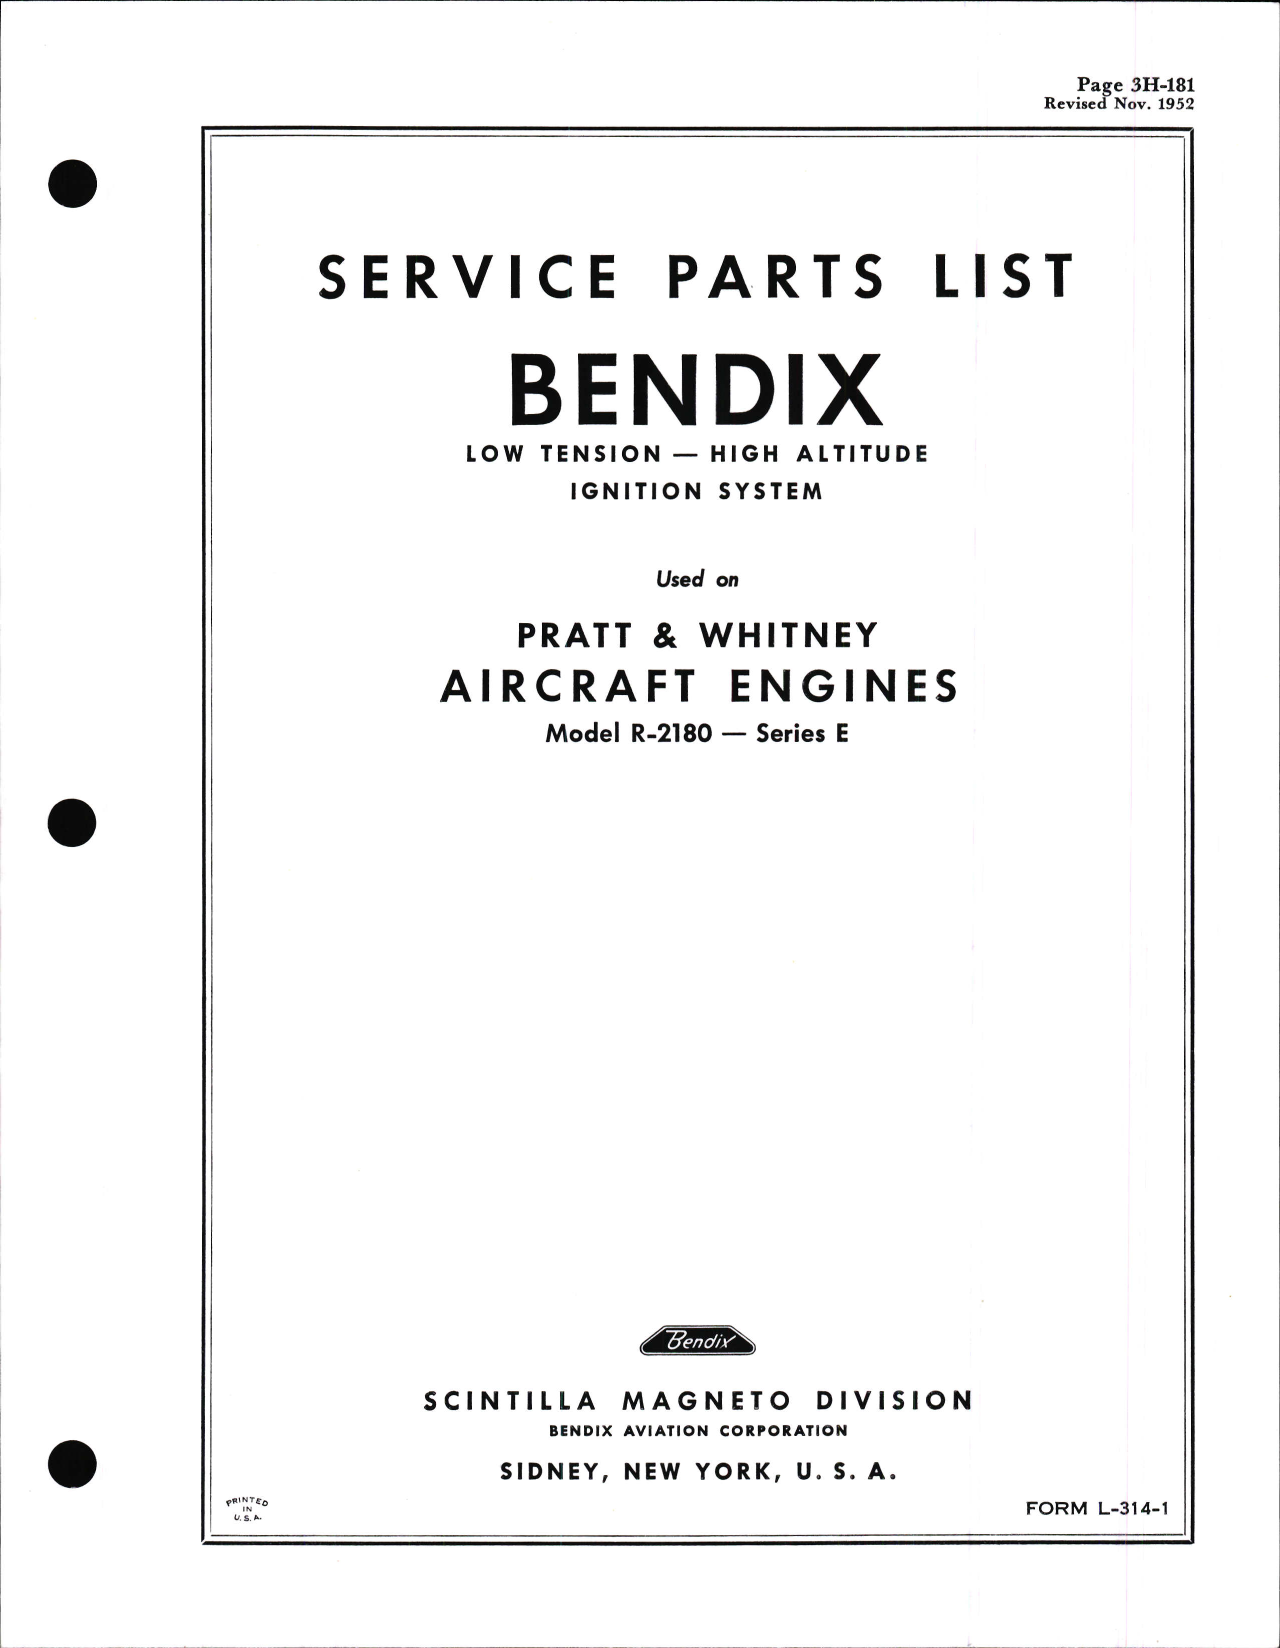 Sample page 1 from AirCorps Library document: Service Parts List for Bendix Low Tension - High Altitude Ignition used on Pratt & Whitney R-2180 E Series